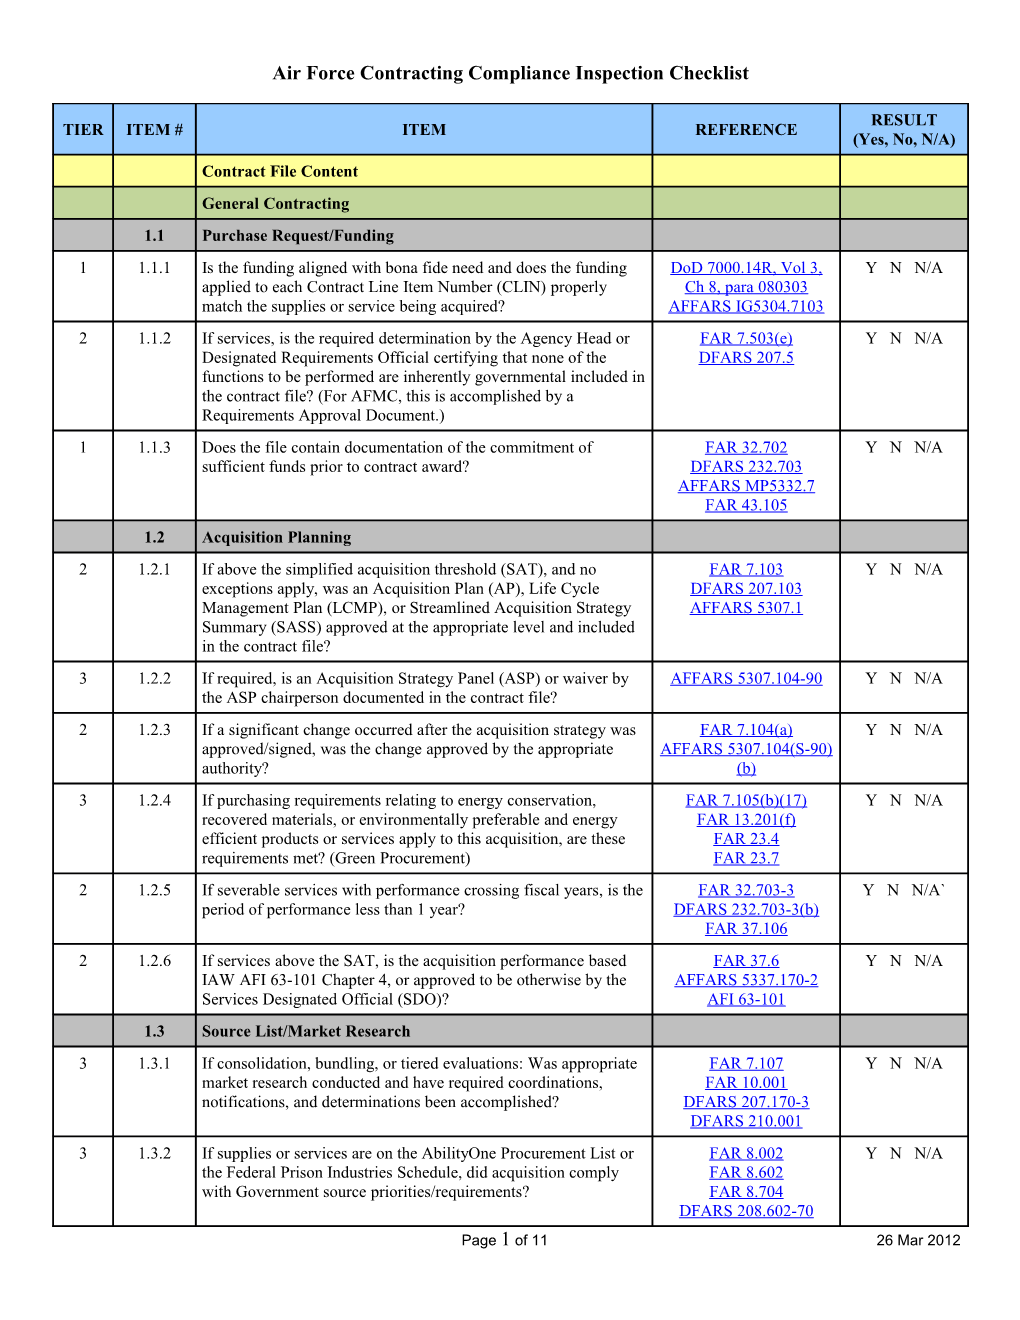 Air Force Compliance Inspection Checklist